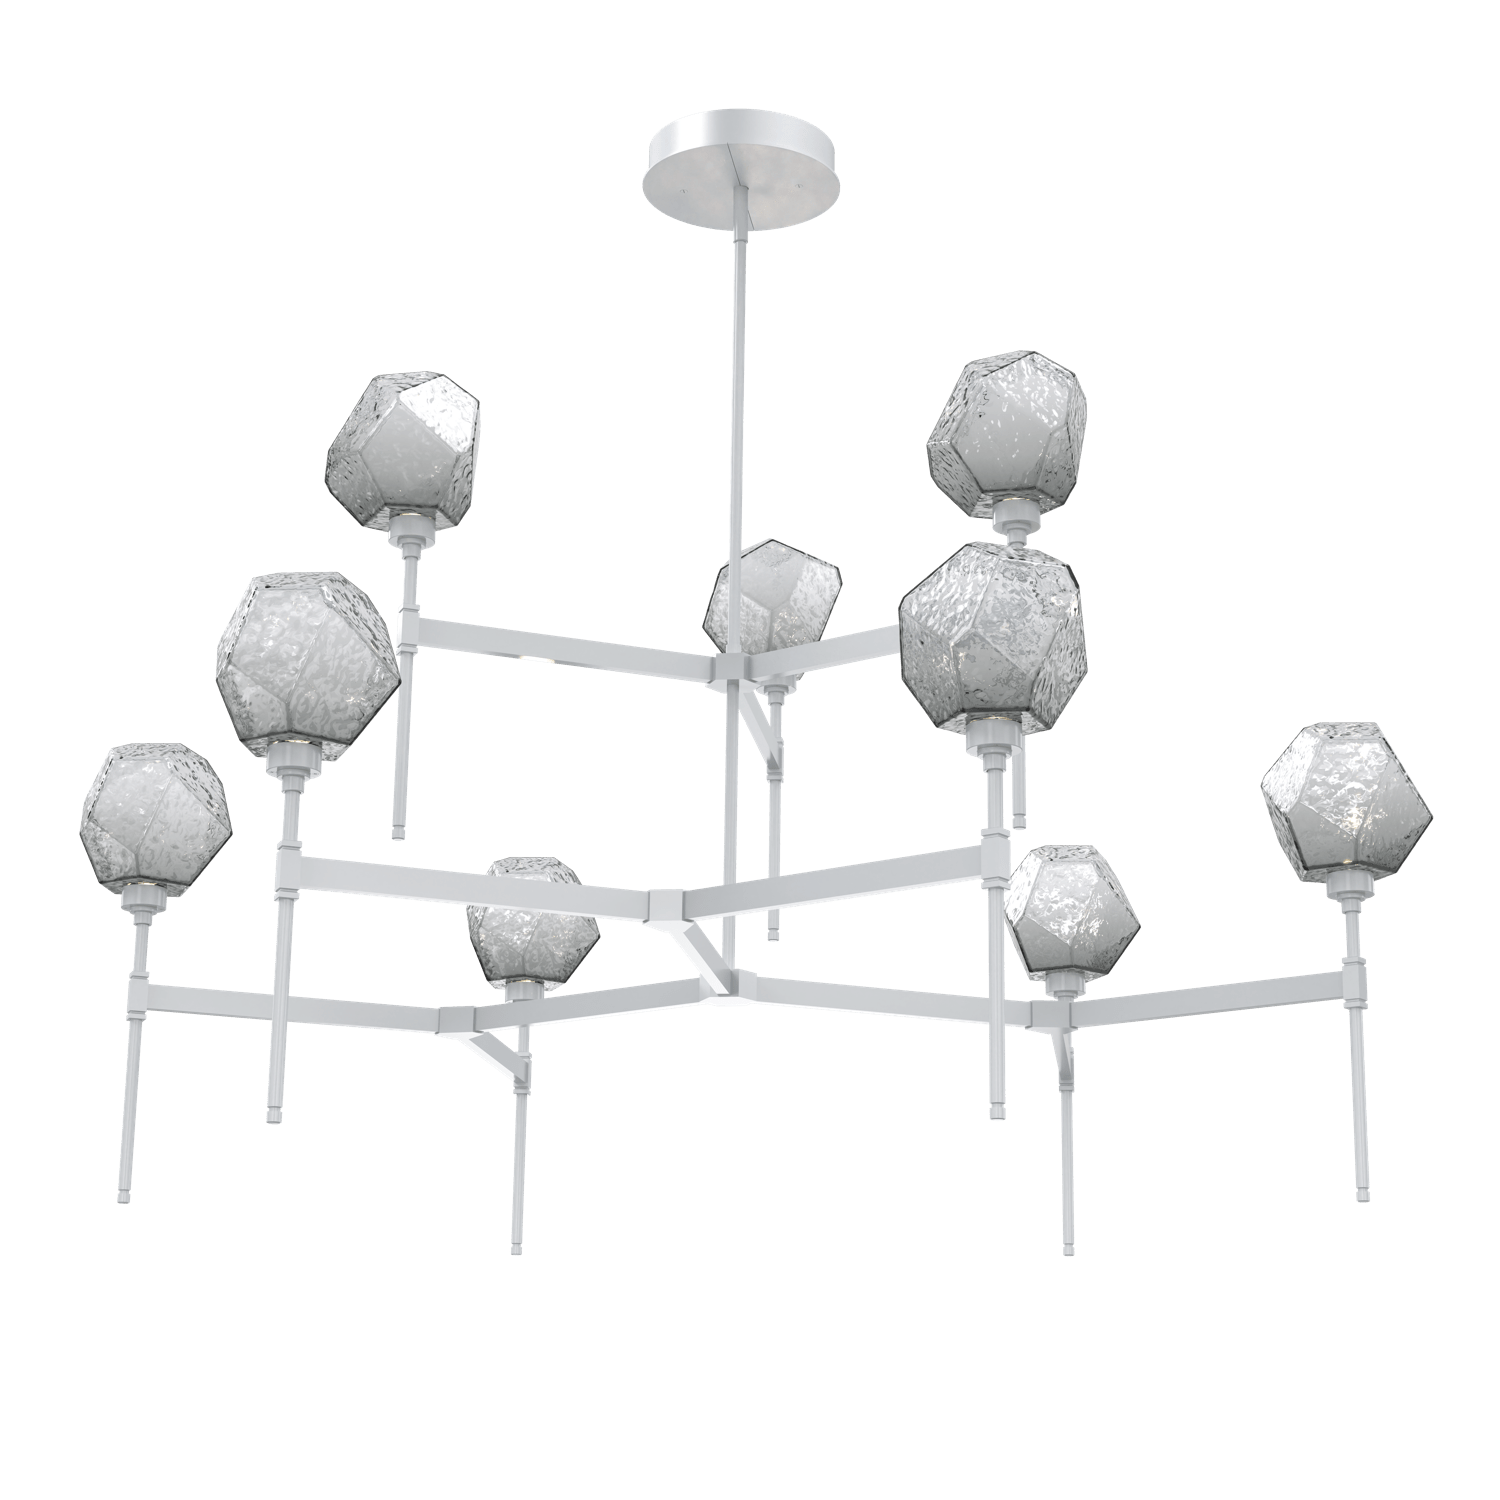 CHB0039-55-CS-S-Hammerton-Studio-Gem-round-two-tier-belvedere-chandelier-with-classic-silver-finish-and-smoke-blown-glass-shades-and-LED-lamping